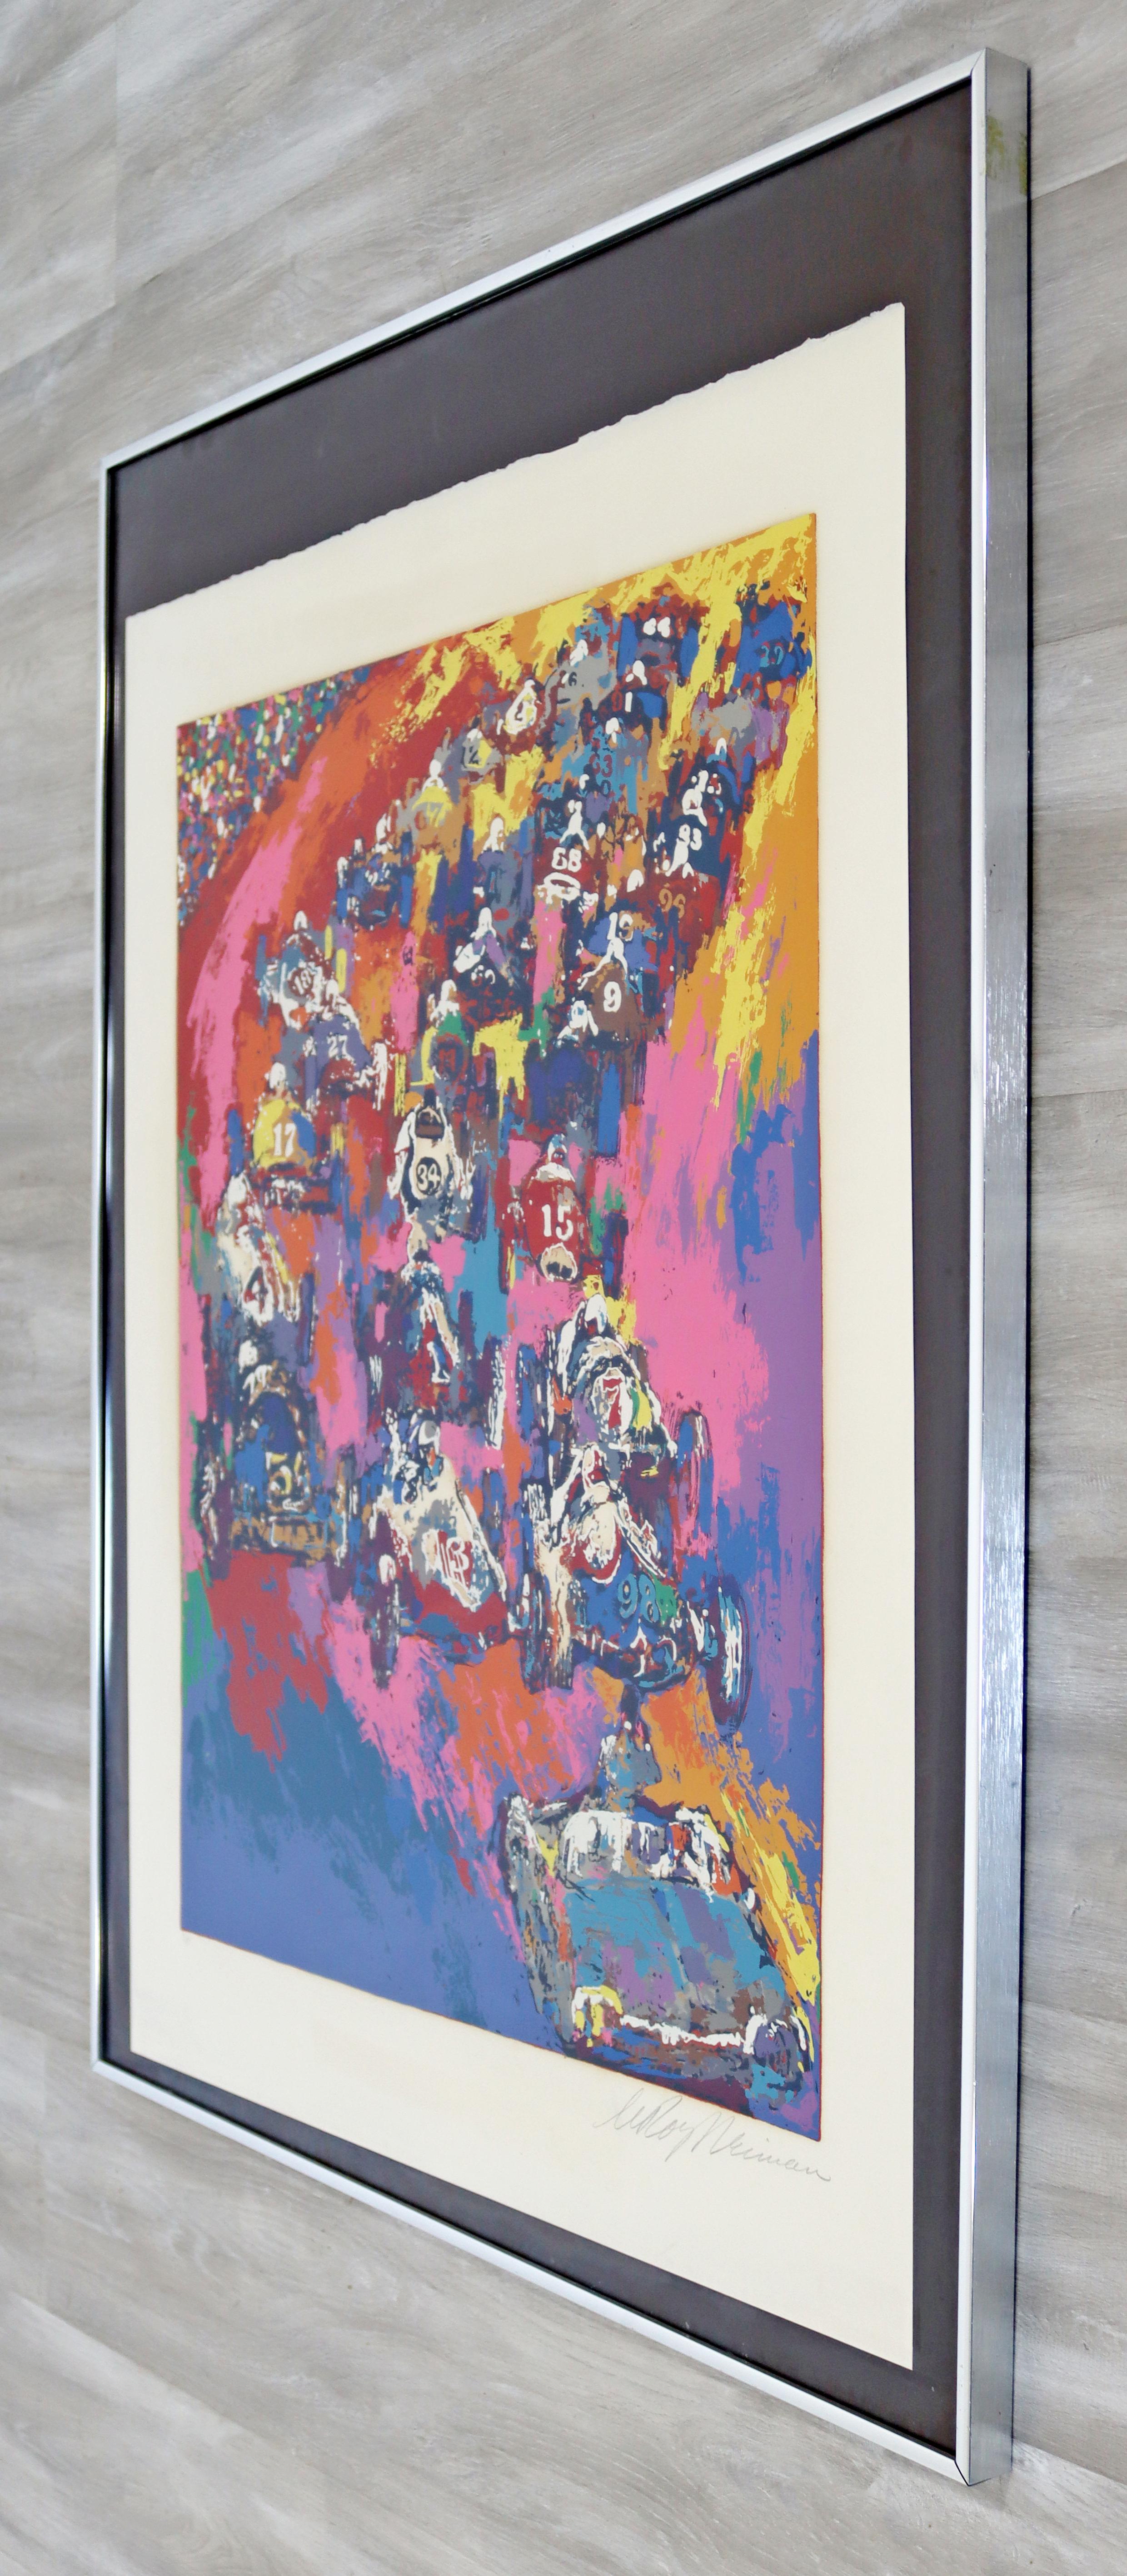 Late 20th Century Mid-Century Modern Framed Indy Start A.P. Lithograph Signed Leroy Neiman, 1970s